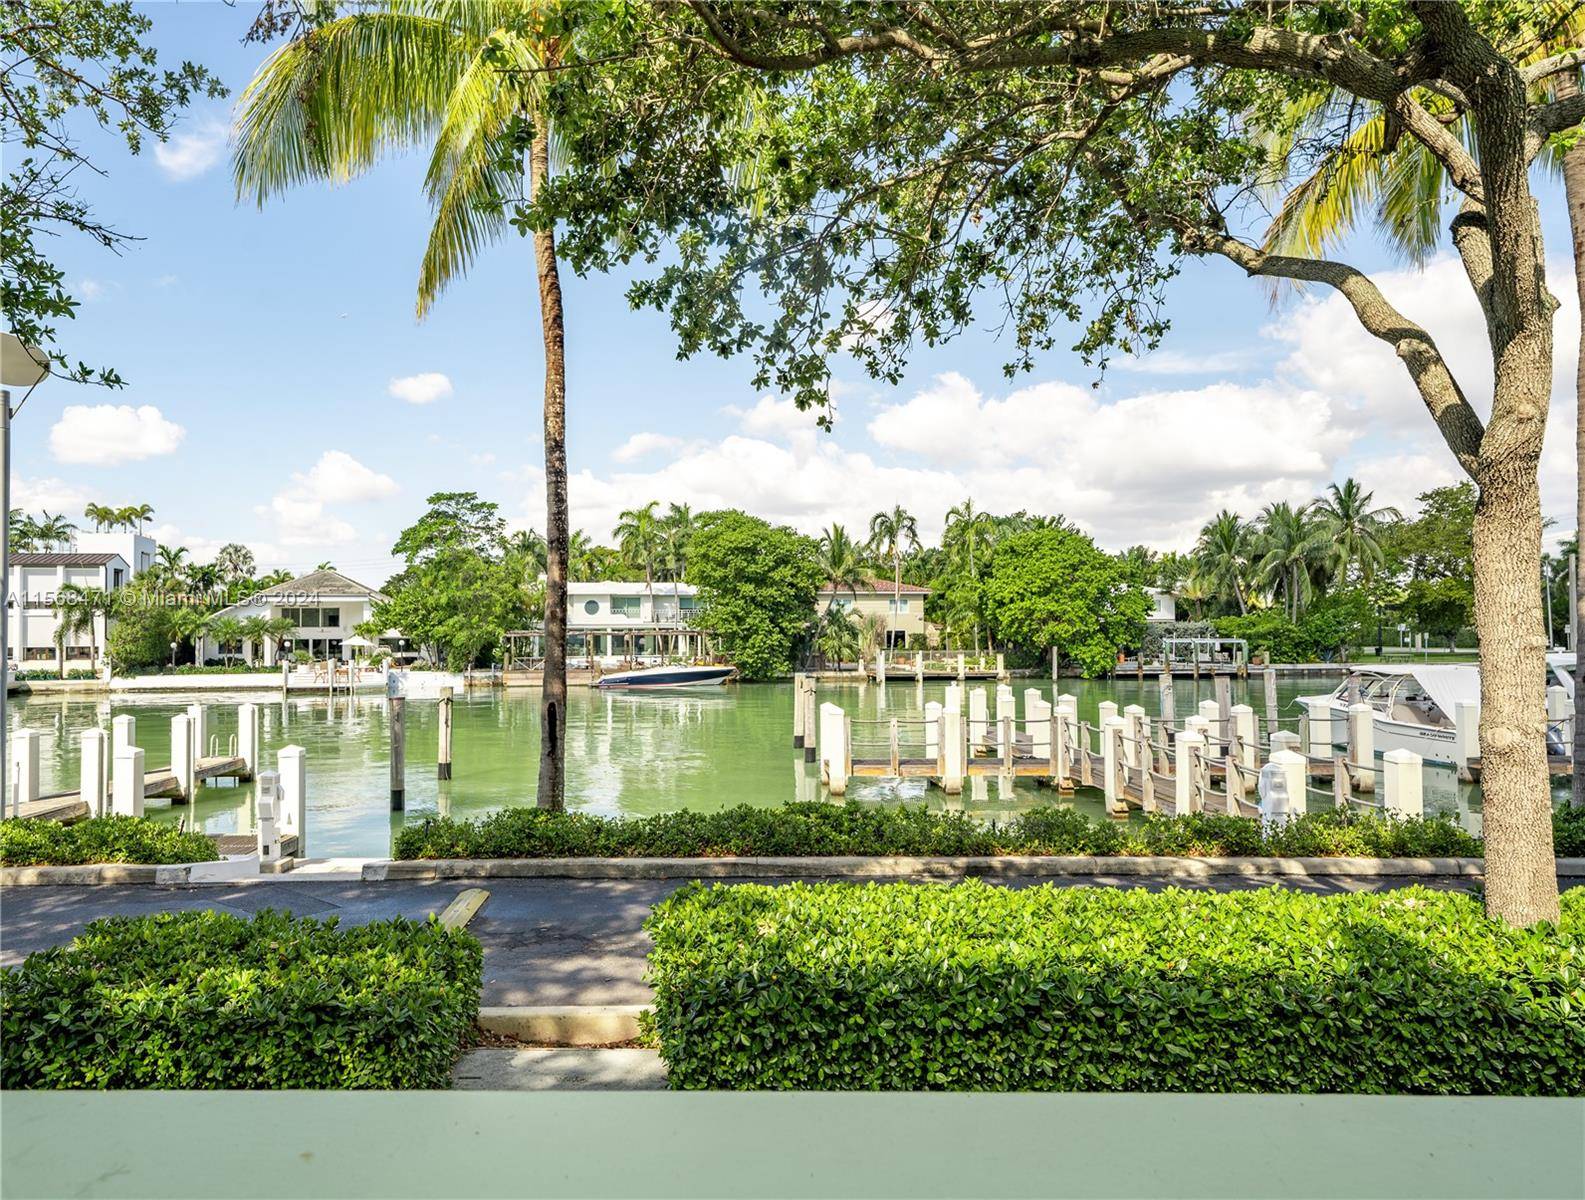 Waterfront, Dock, Privacy, Security and Amenities, this upgraded 5 bed 5 1 2 bath Waterfront Corner Home by architect Allan Shulman has sunset downtown views in exclusive gated AQUA.